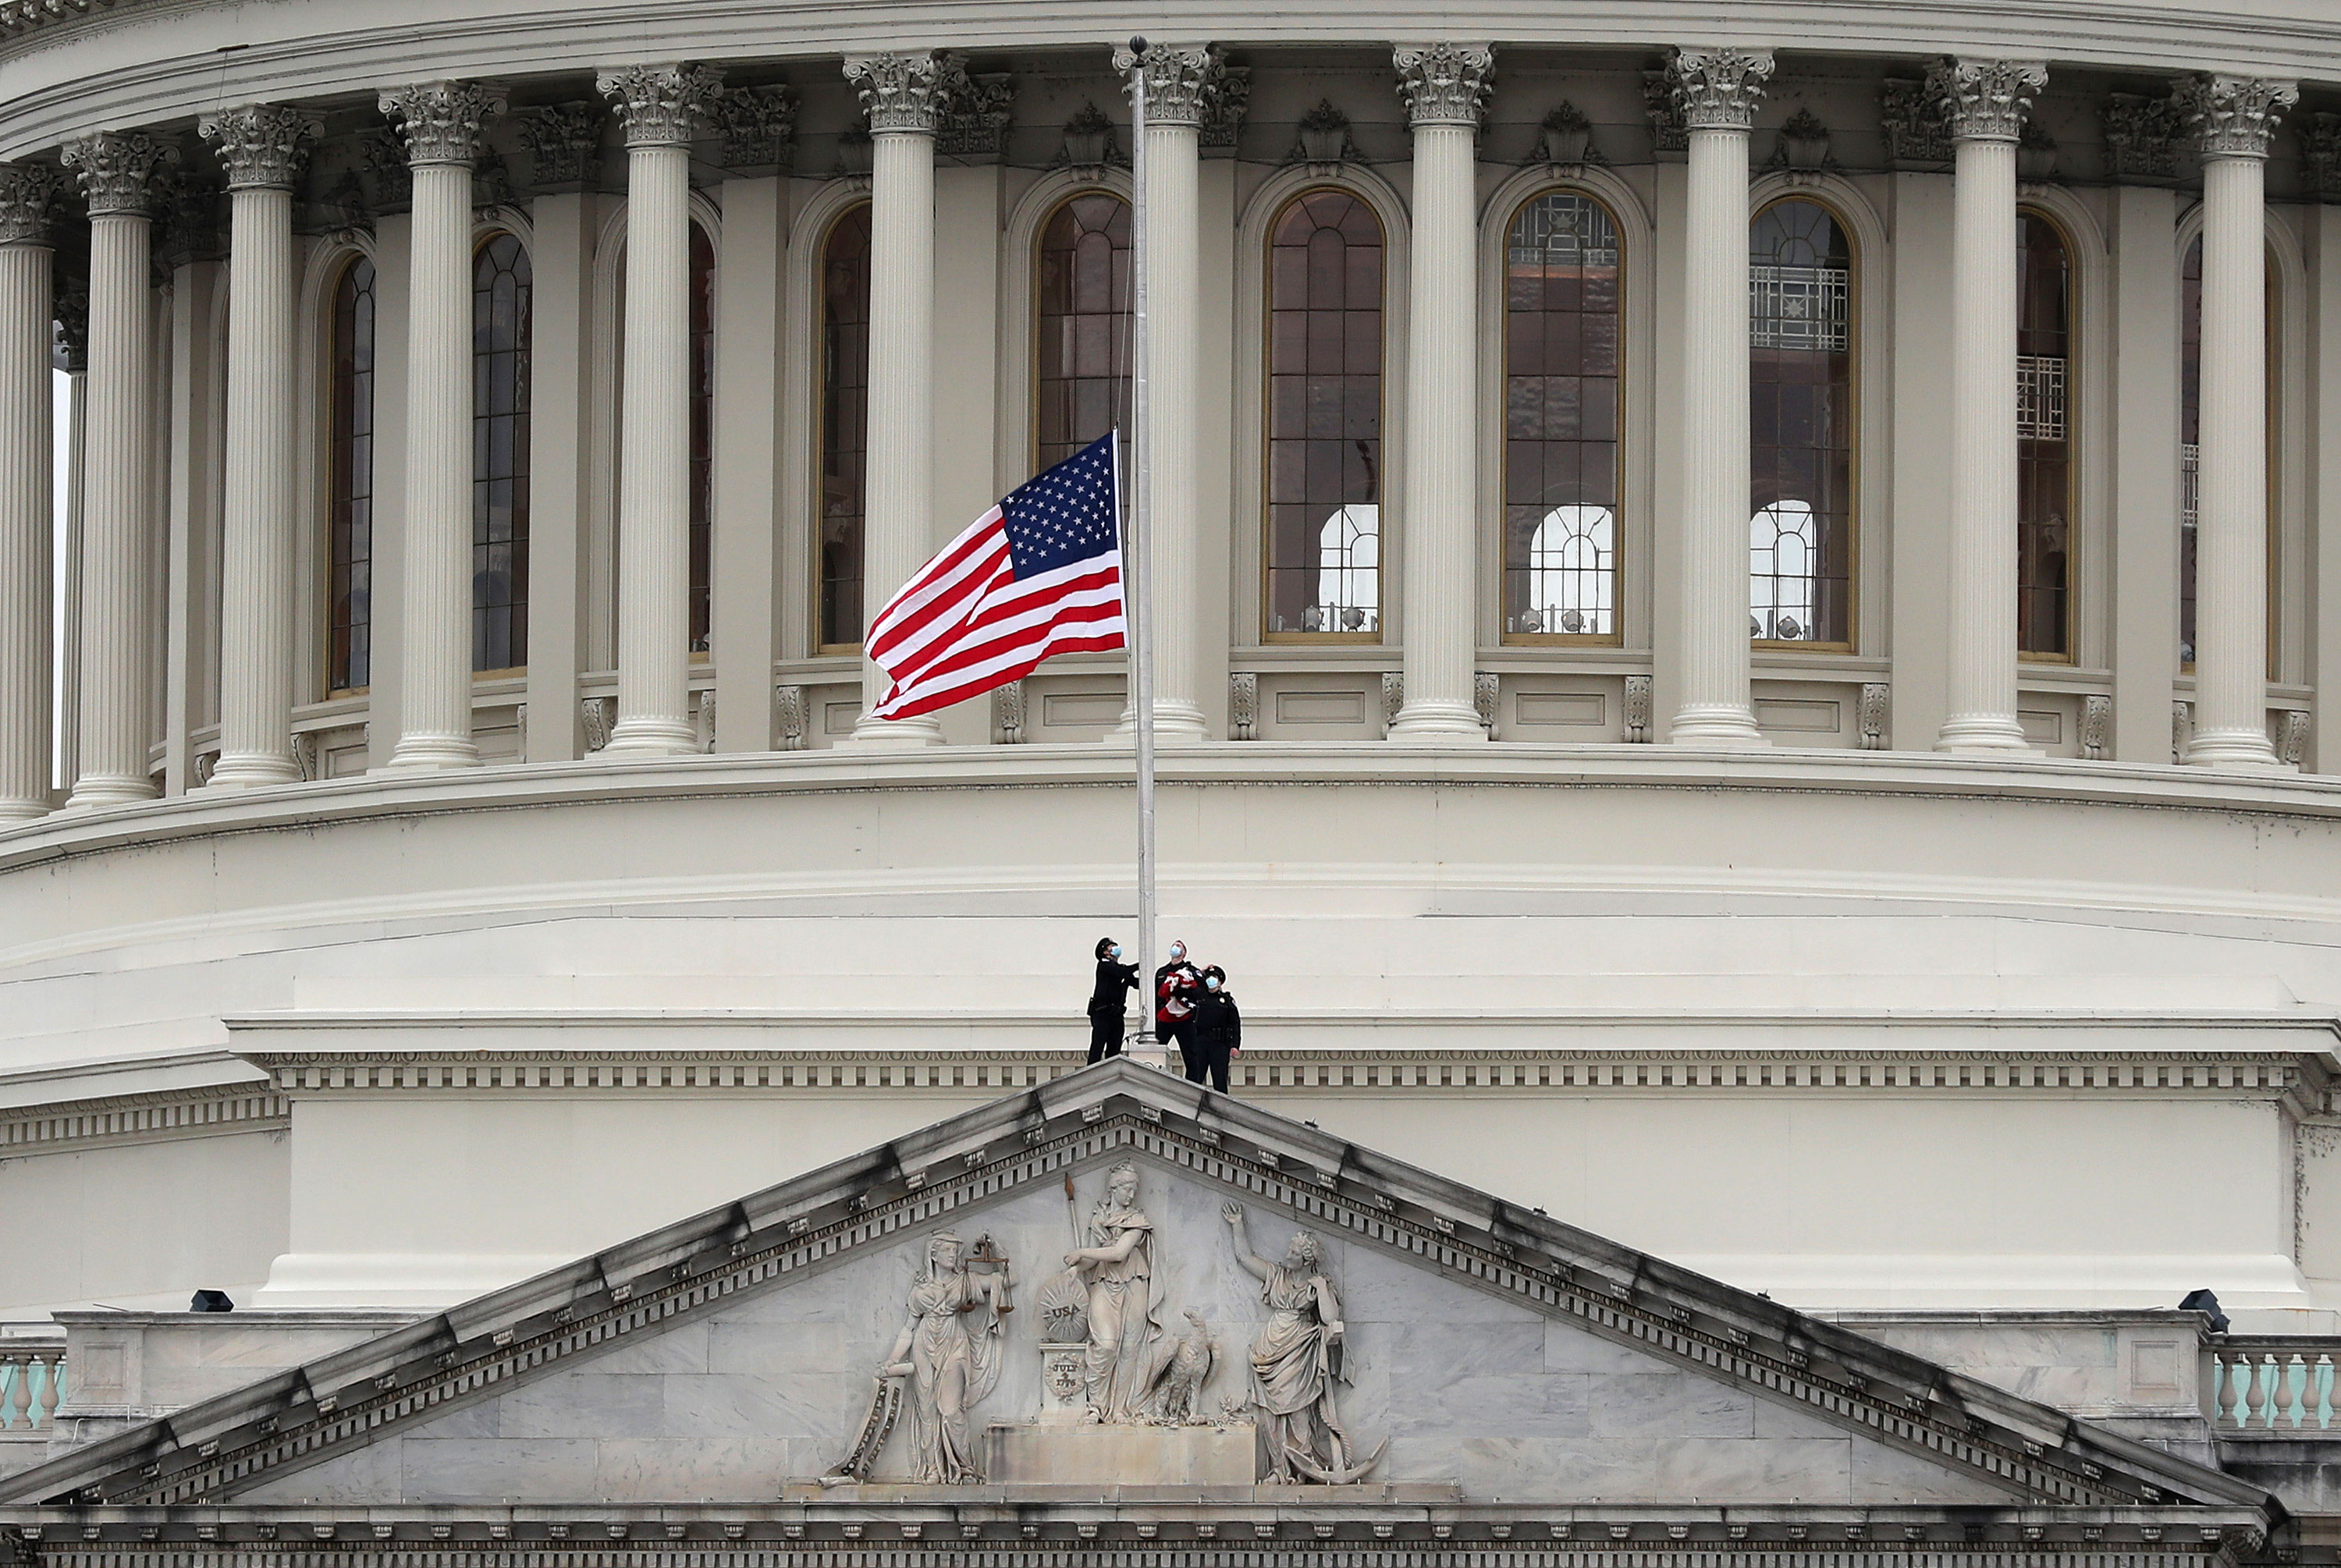 The US flag at the Capitol is lowered to half-staff on January 8 following the death of Capitol Police Officer Brian Sicknick.